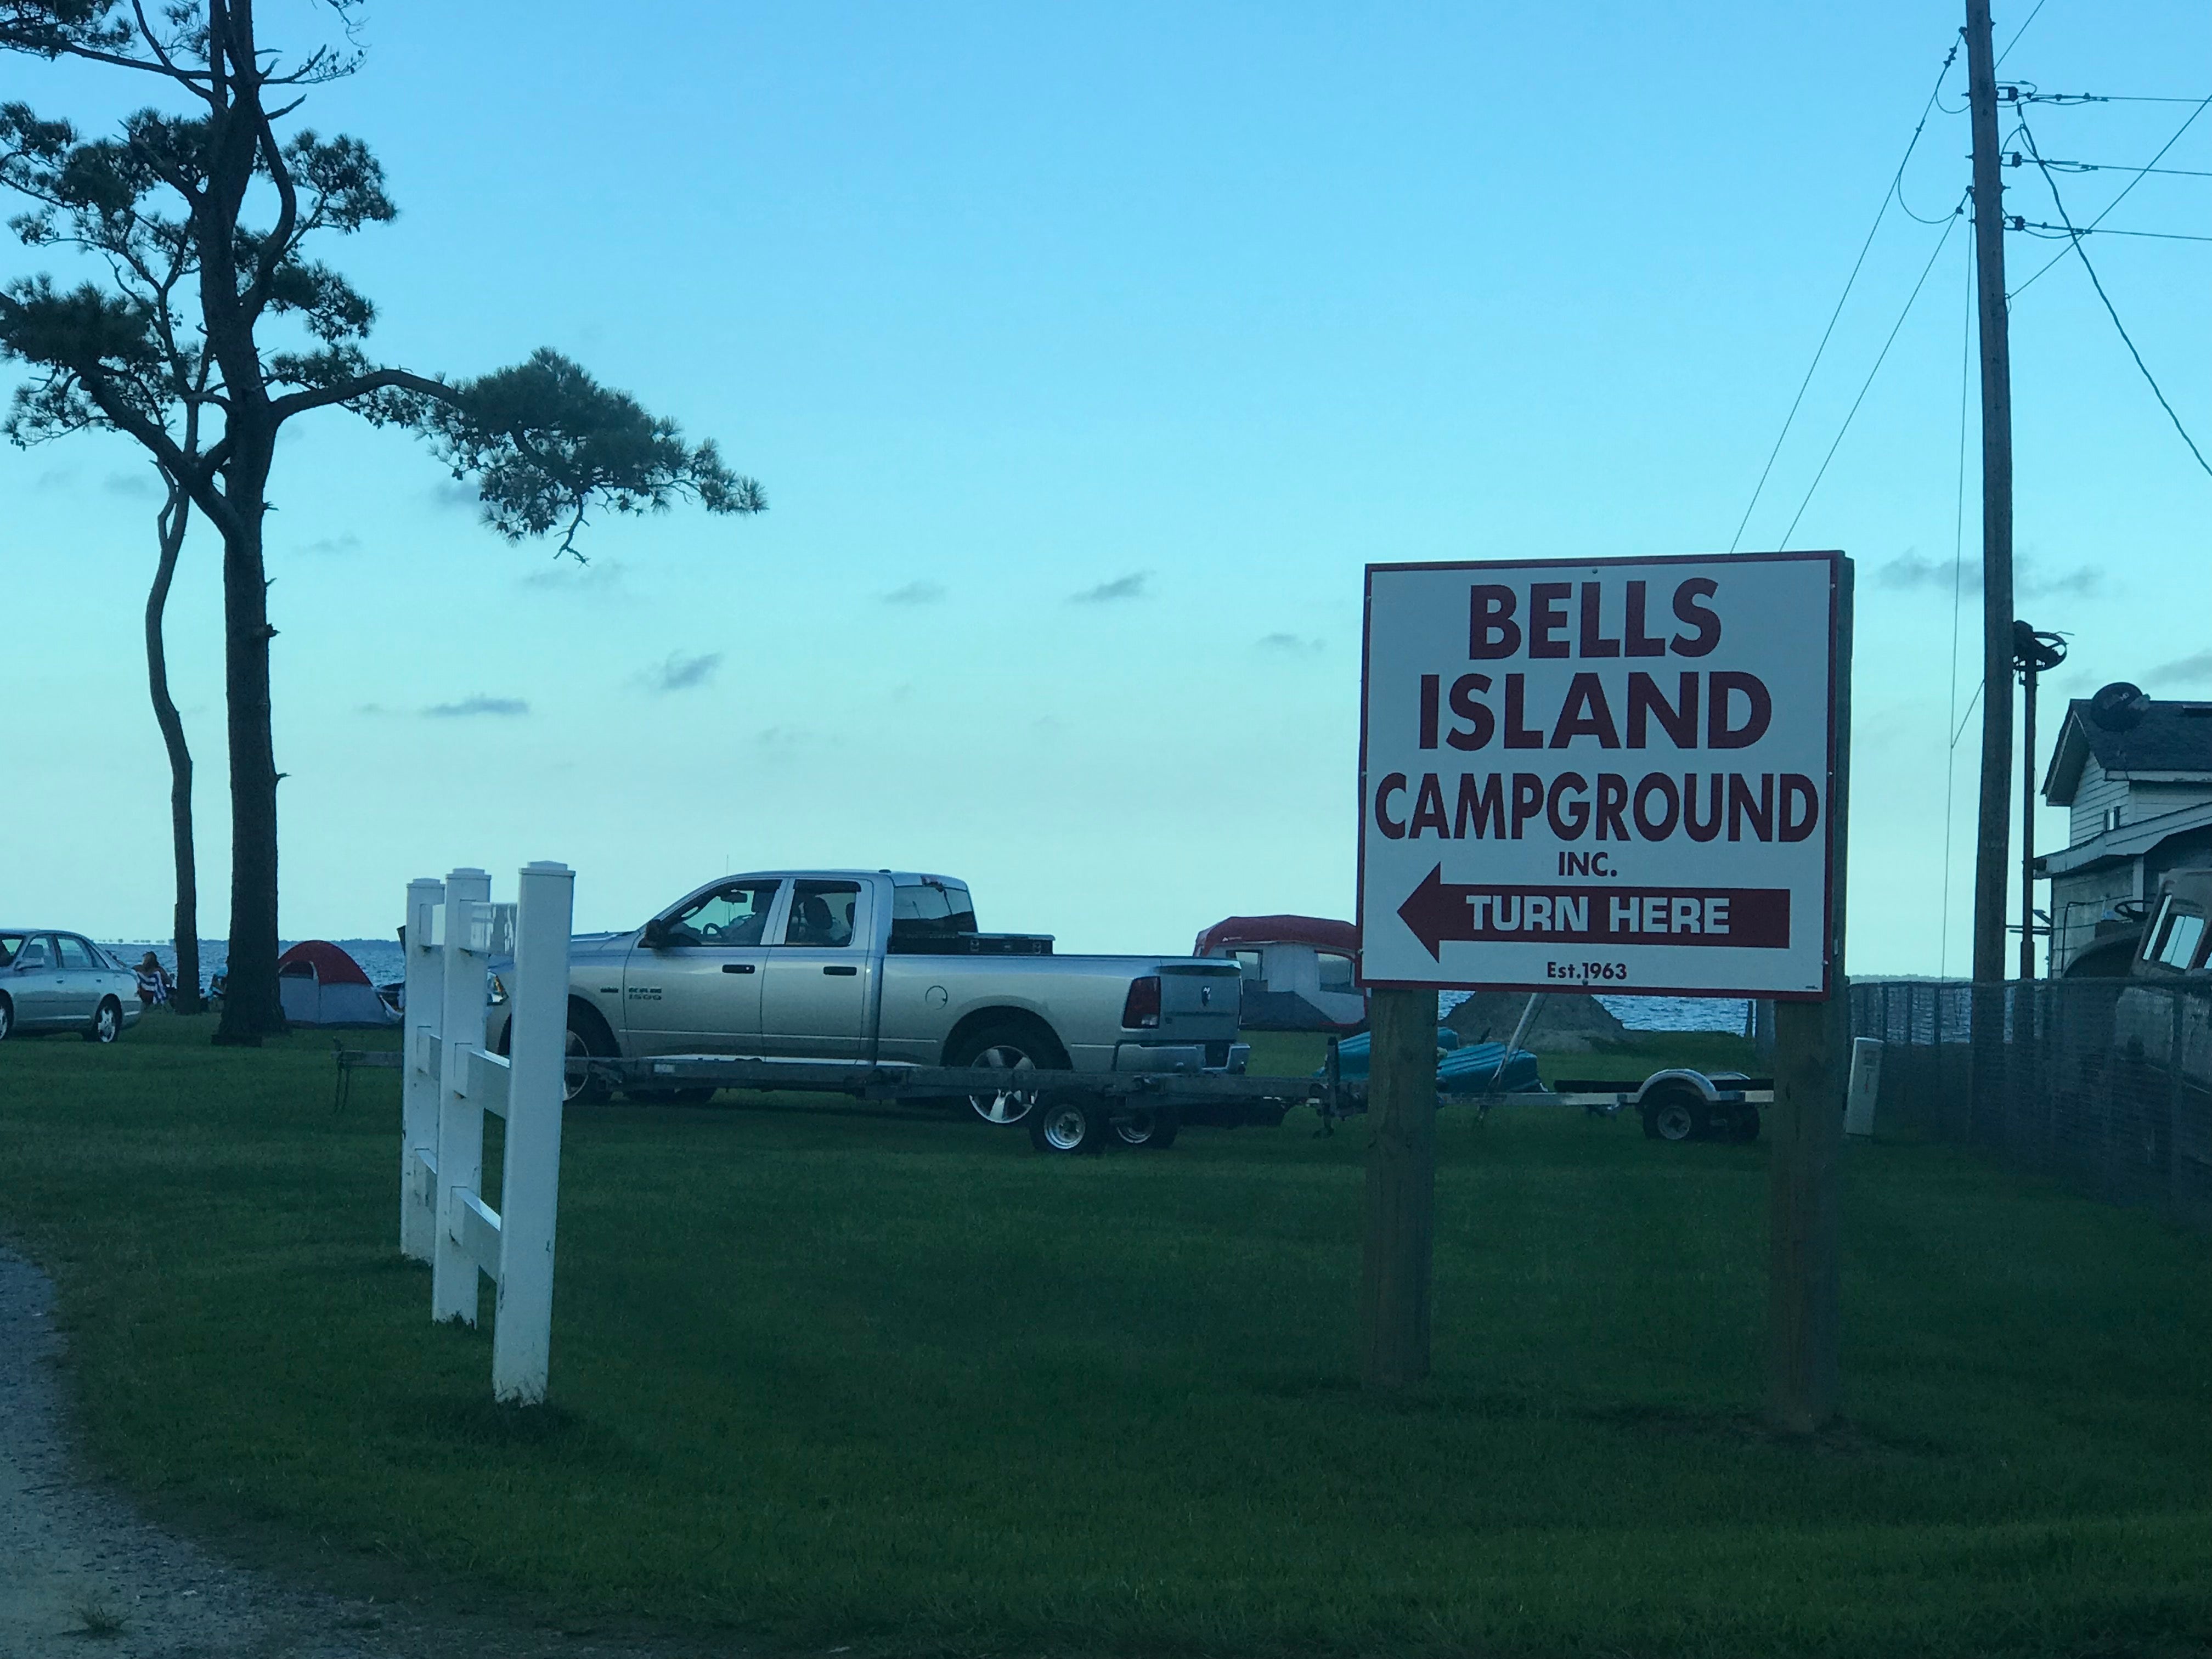 Camper submitted image from Bells Island Campground - 2